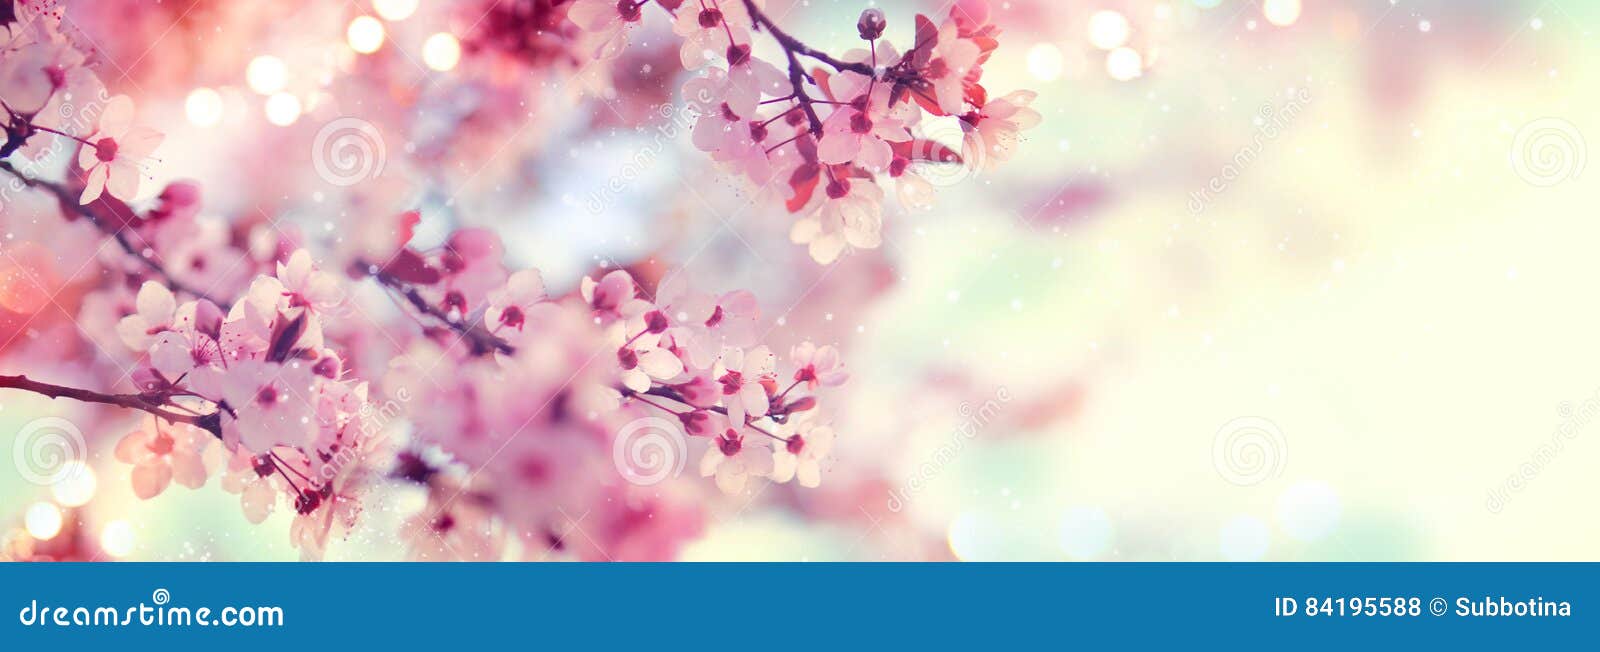 spring border or background art with pink blossom